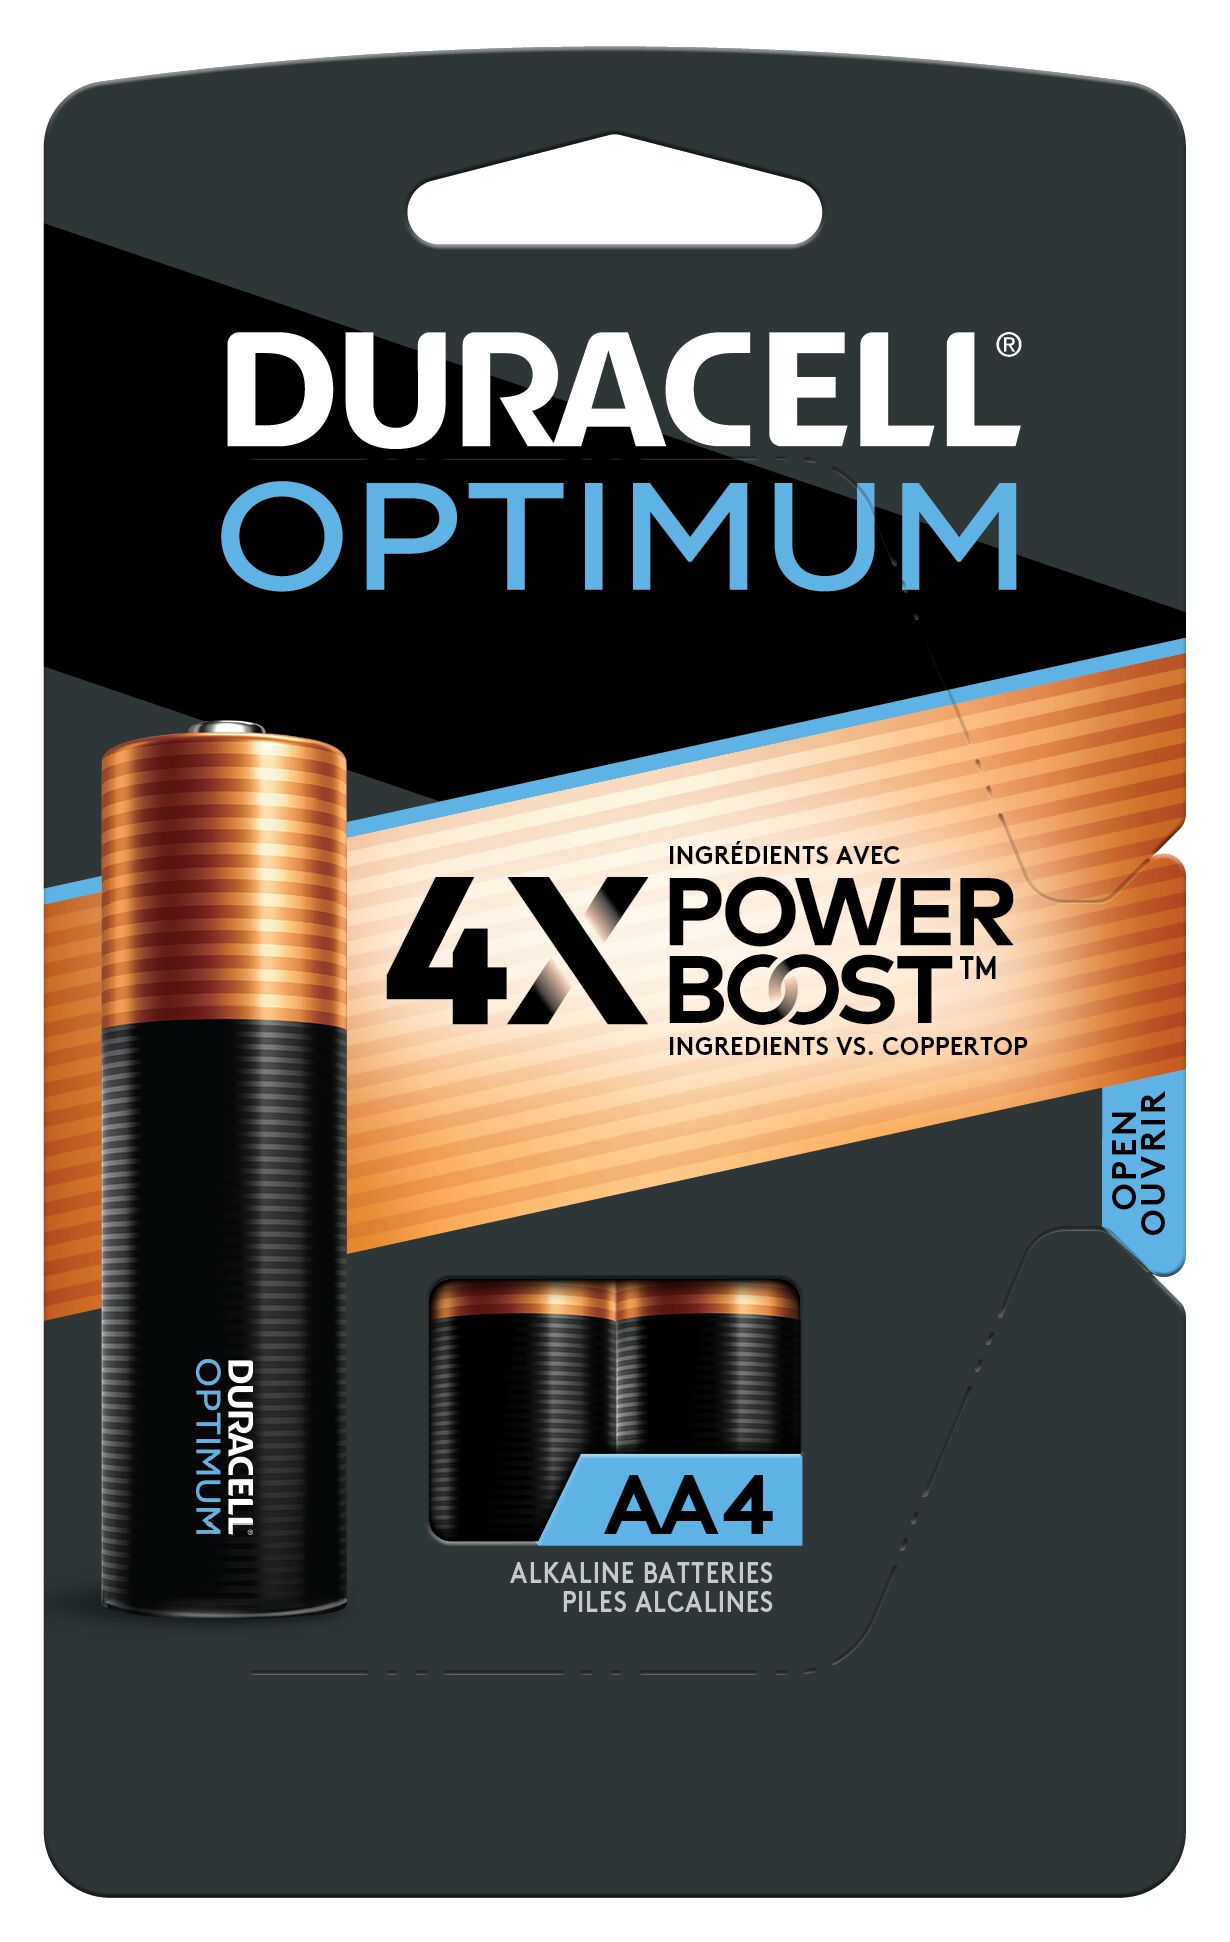 Better Than Duracell? Pale Blue Earth Makes Its Case: AA, AAA Rechargeable  Battery Review